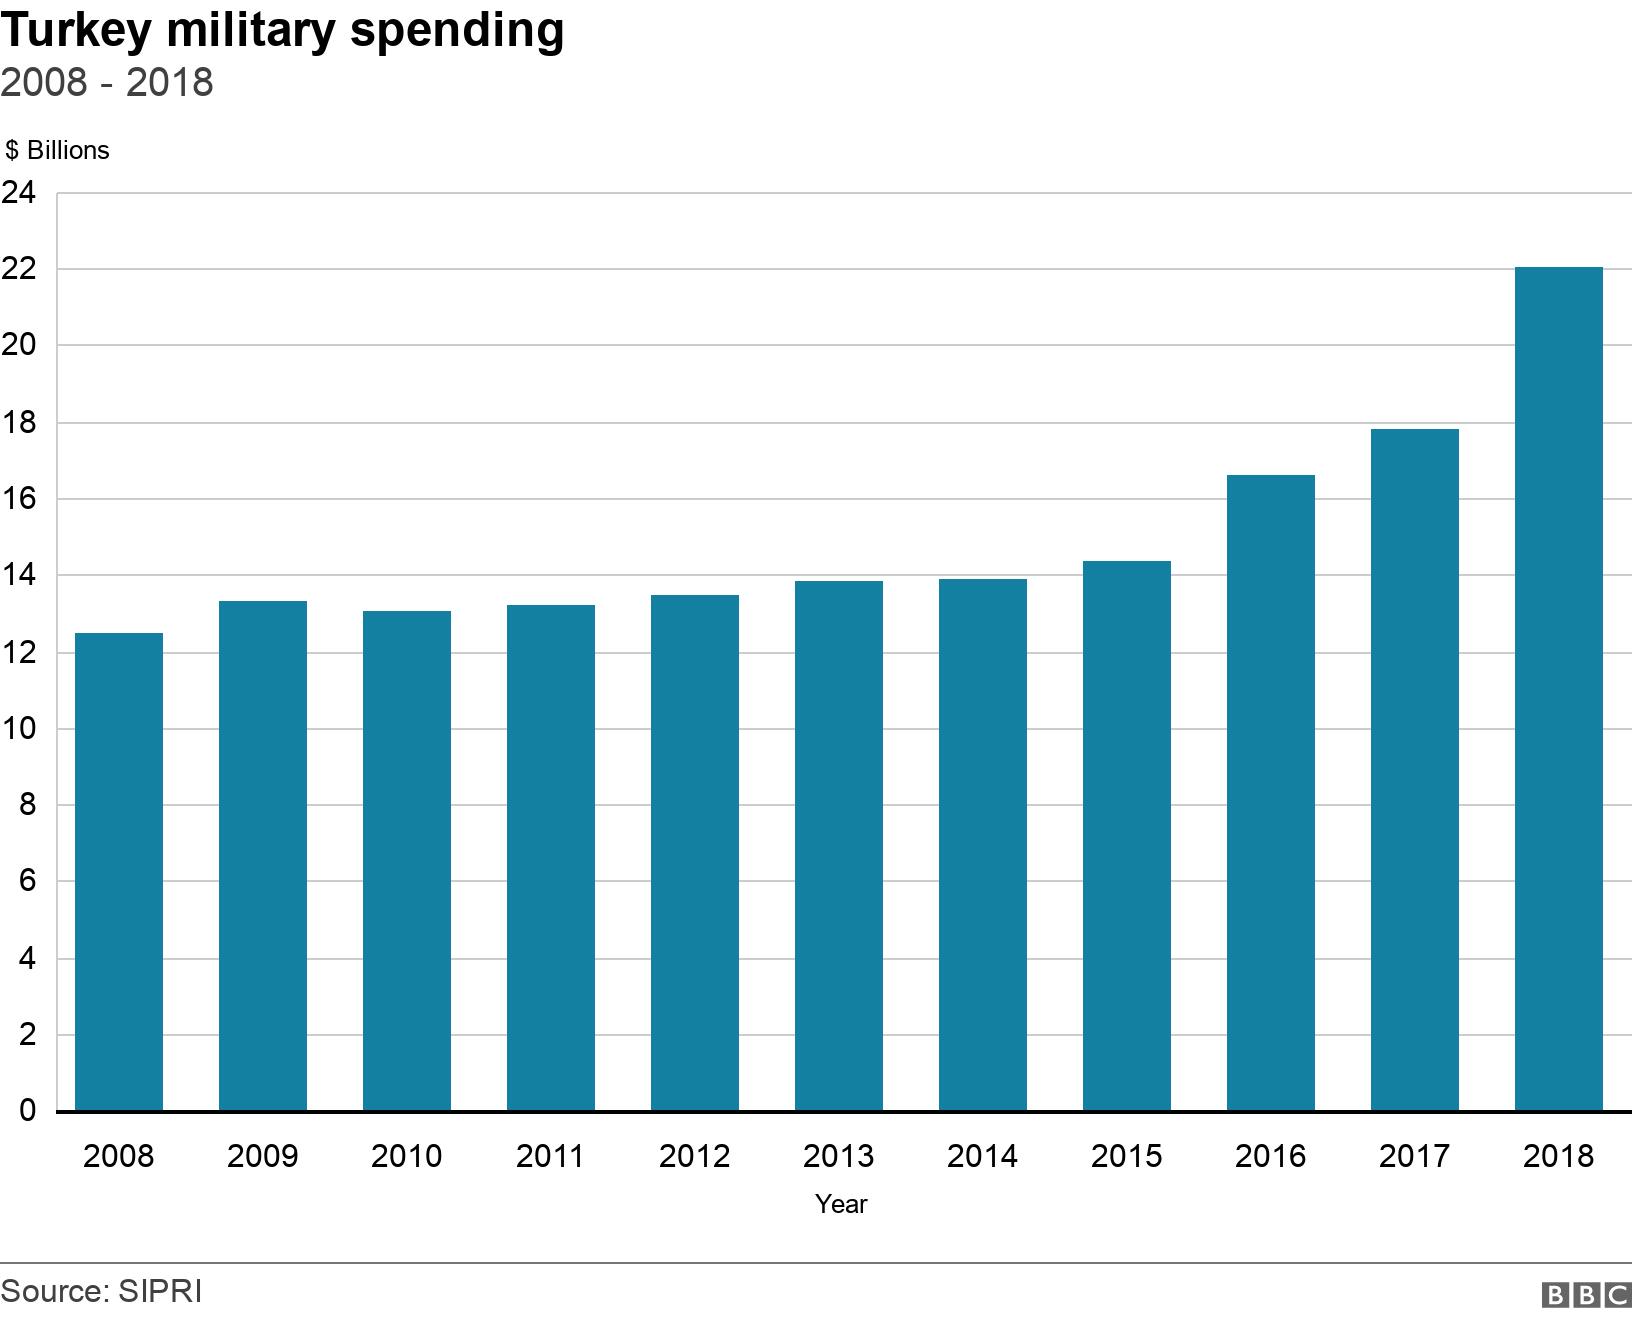 Turkey military spending . 2008 - 2018. Data showing Turkish military spending from 2008 to 2018 .